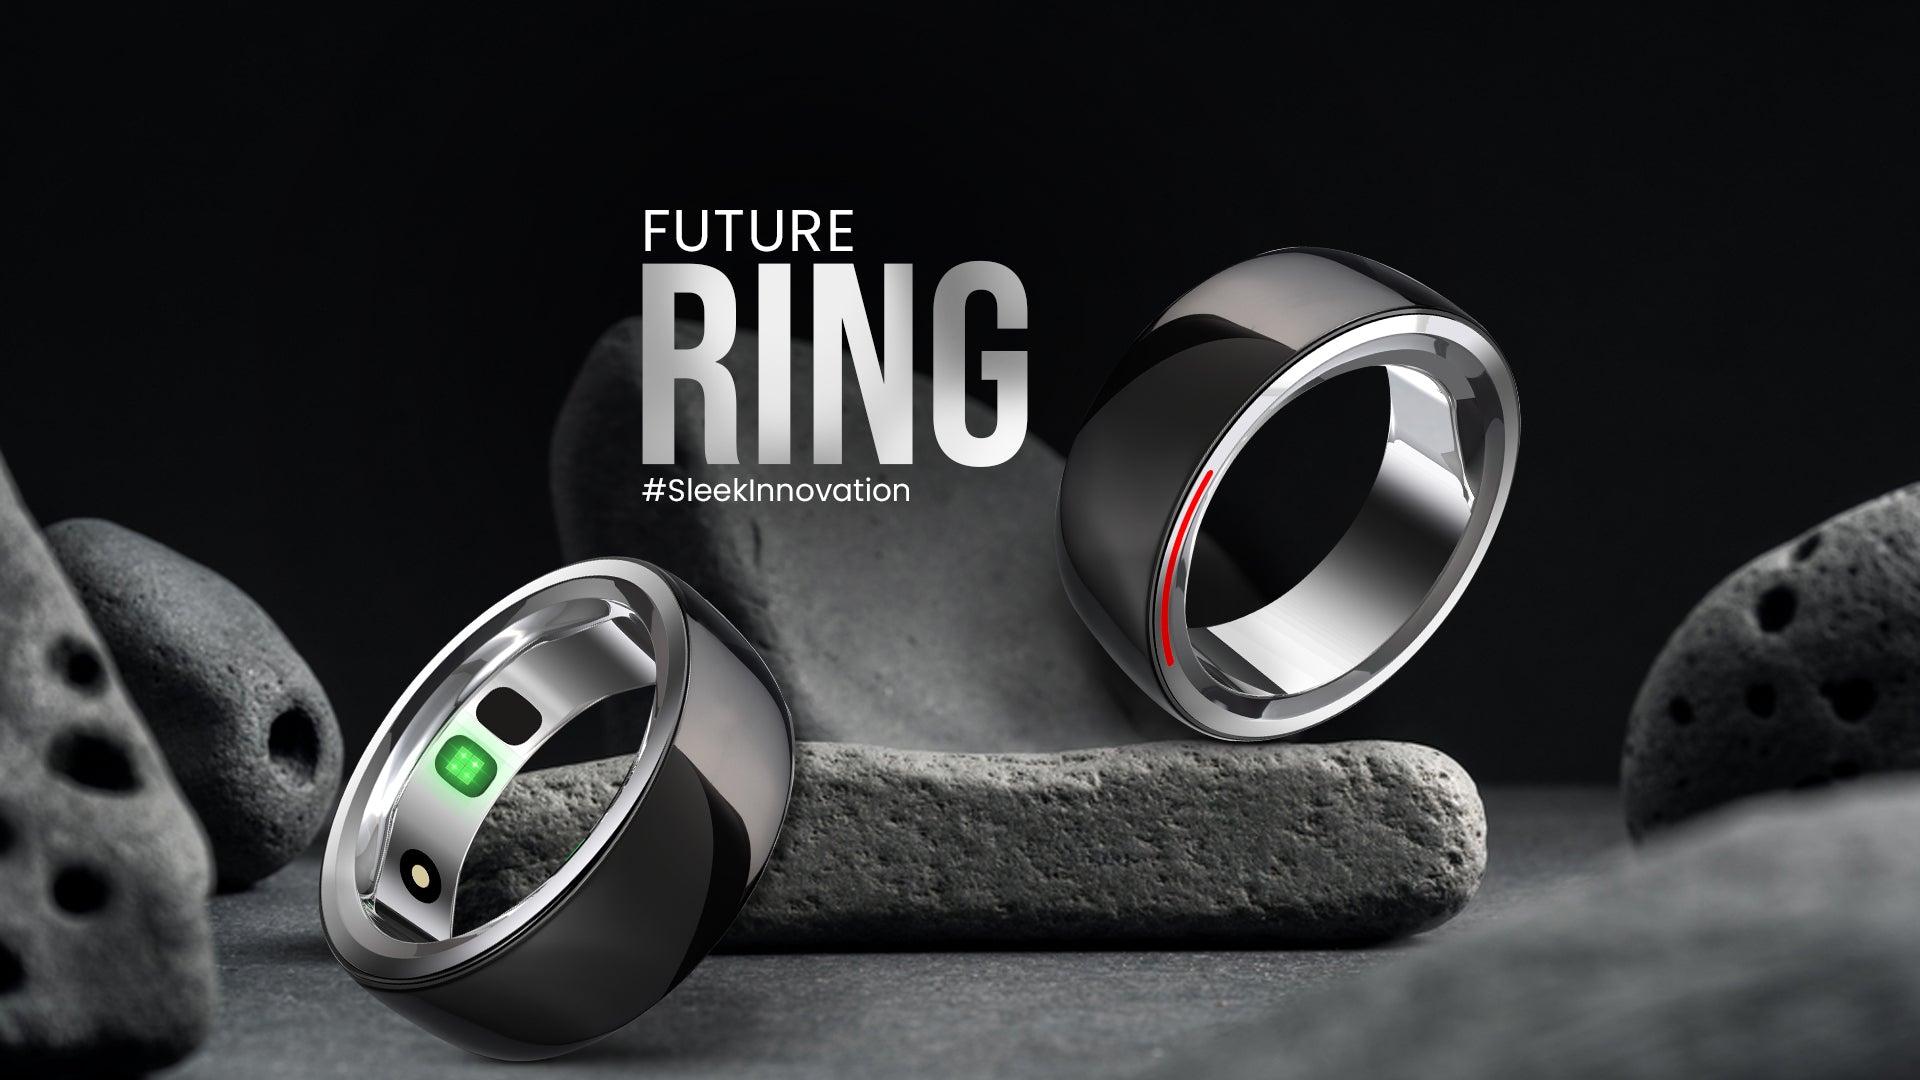 Future Ring: The Stylish and Functional Smart Ring That You Need